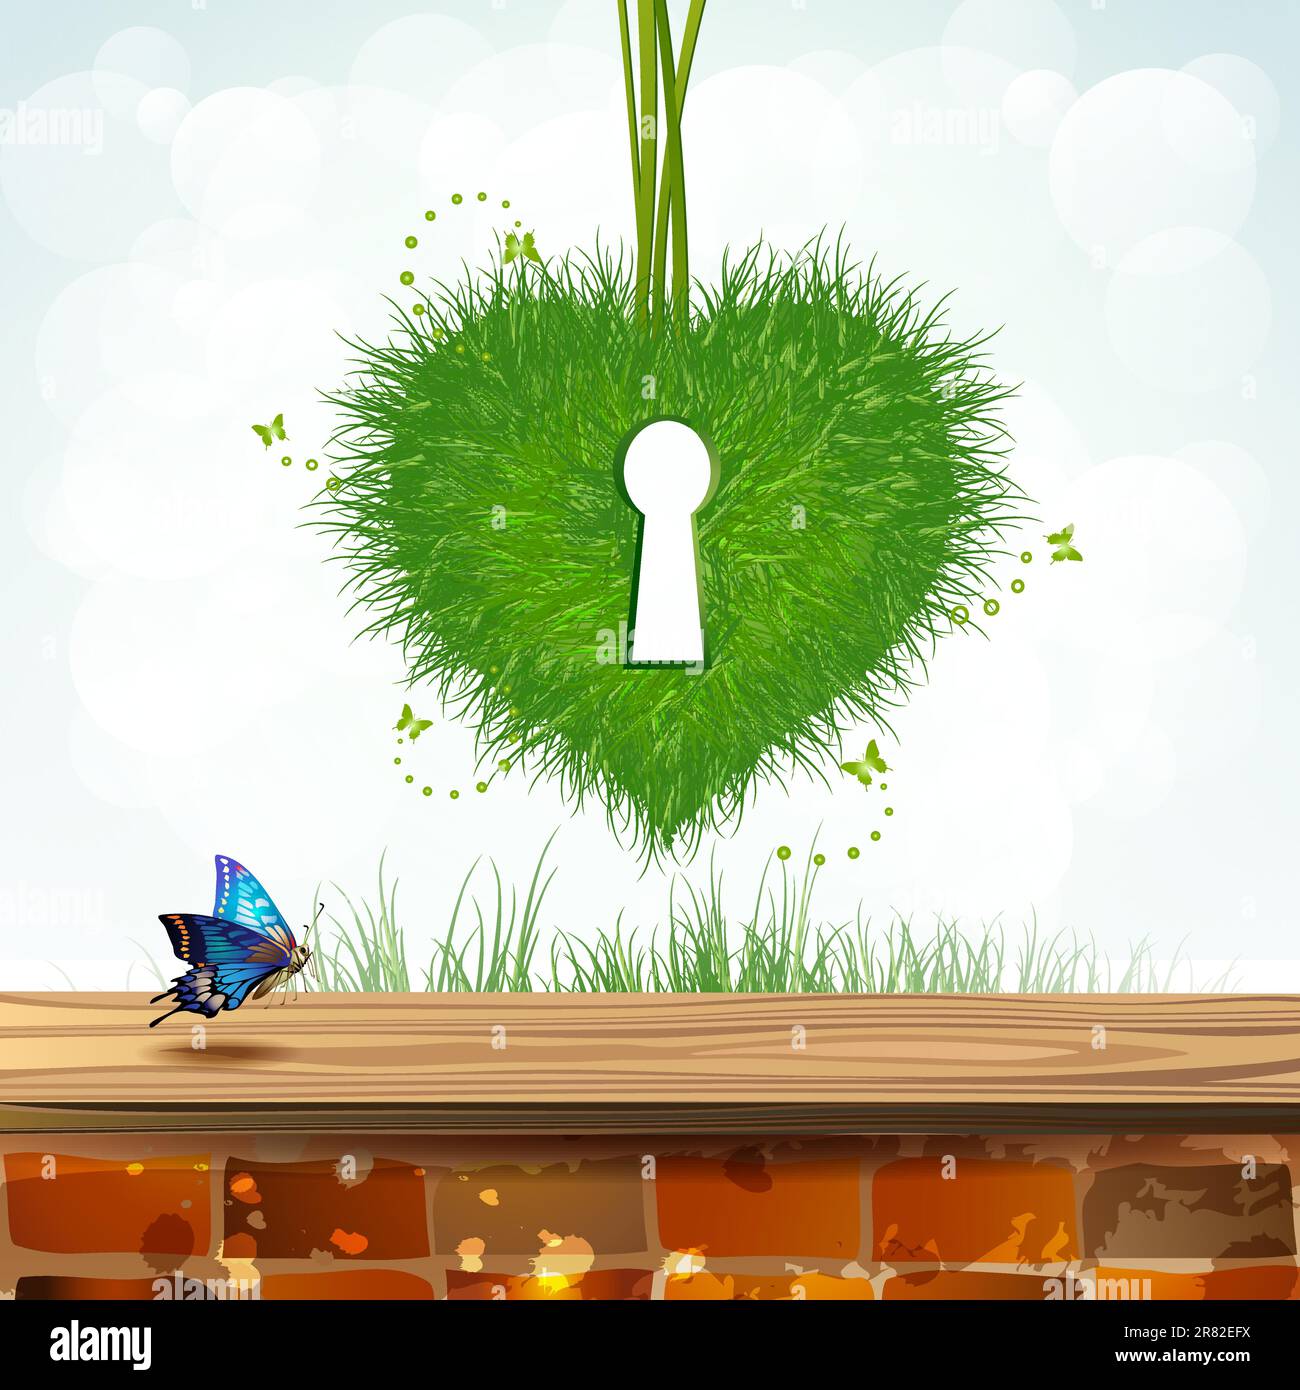 Heart of grass with keyhole over landscape Stock Vector